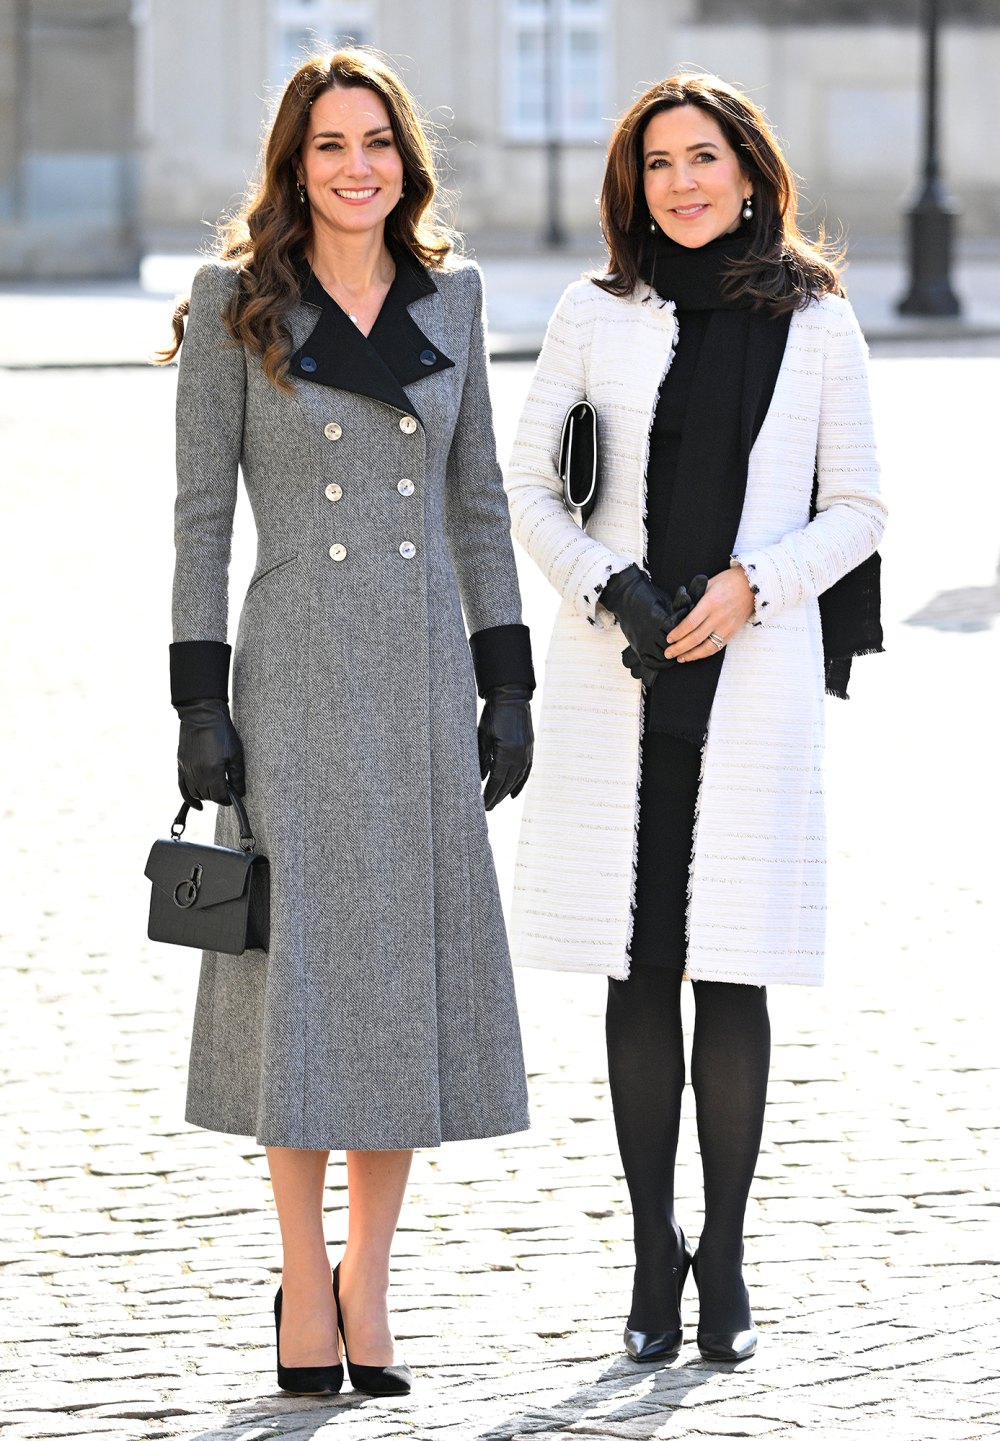 6 elegant fashion lessons to learn from Crown Princess Mary of